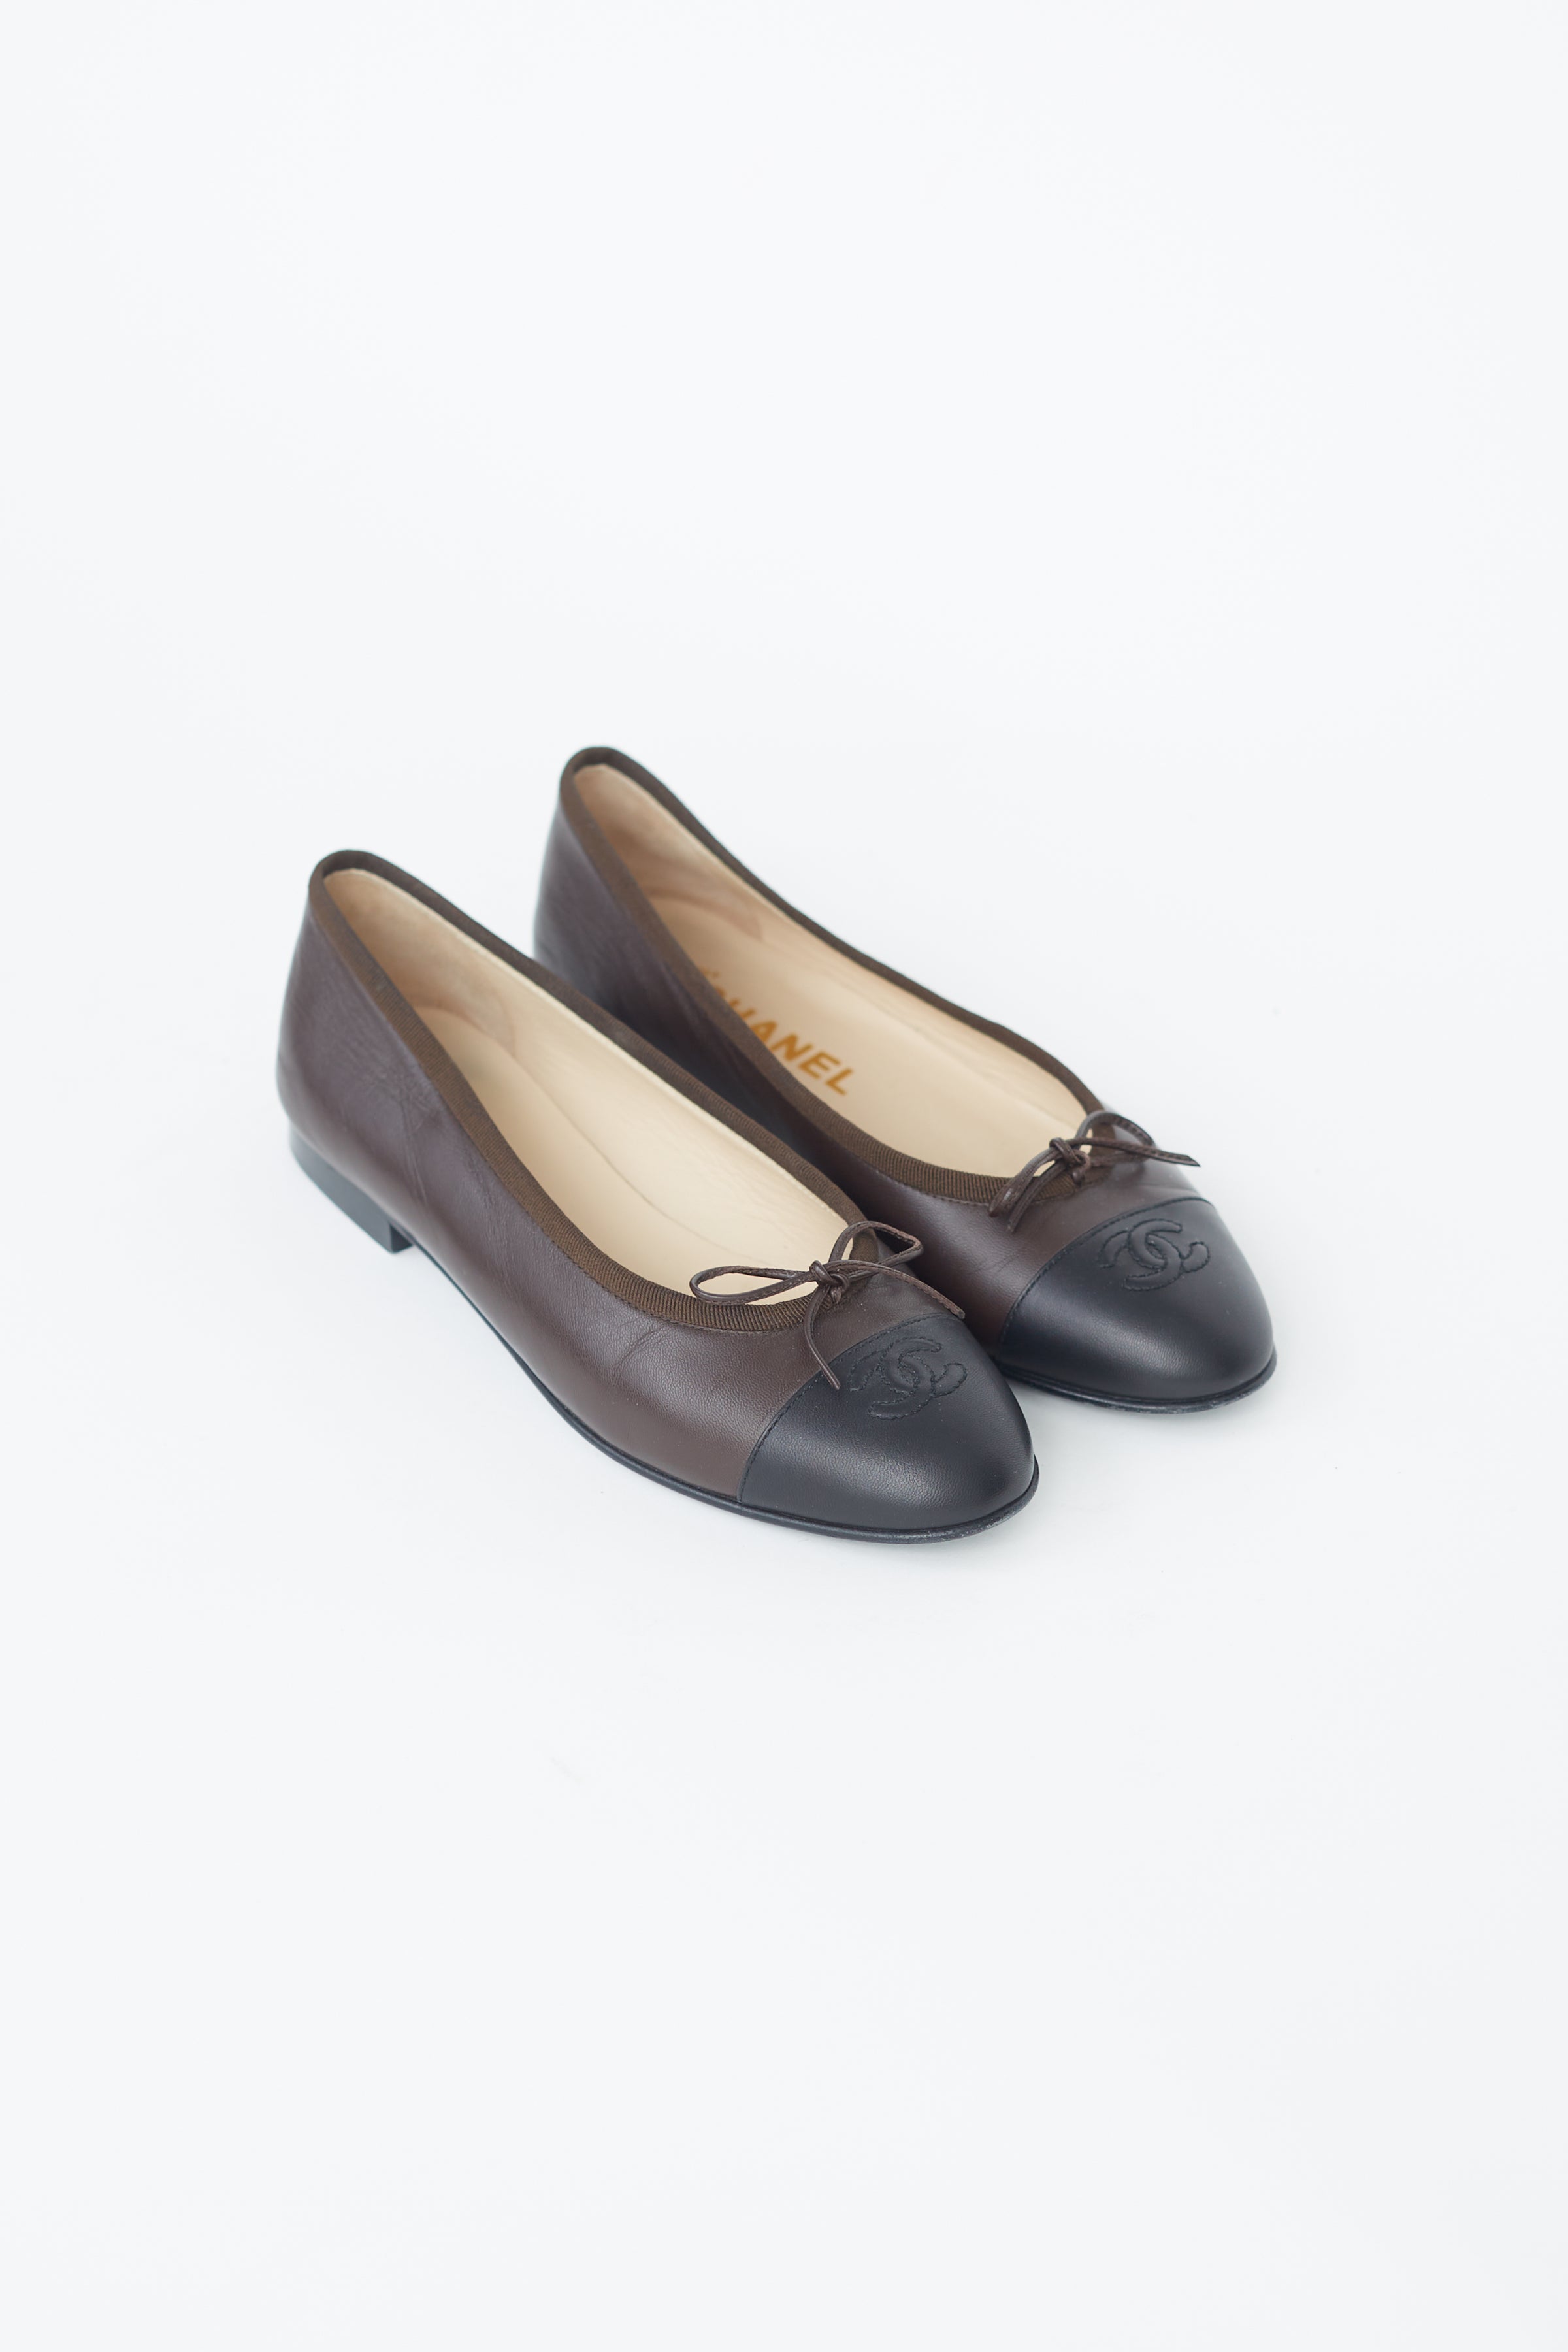 Chanel // Brown Leather Toe Cap Ballet Flat – VSP Consignment